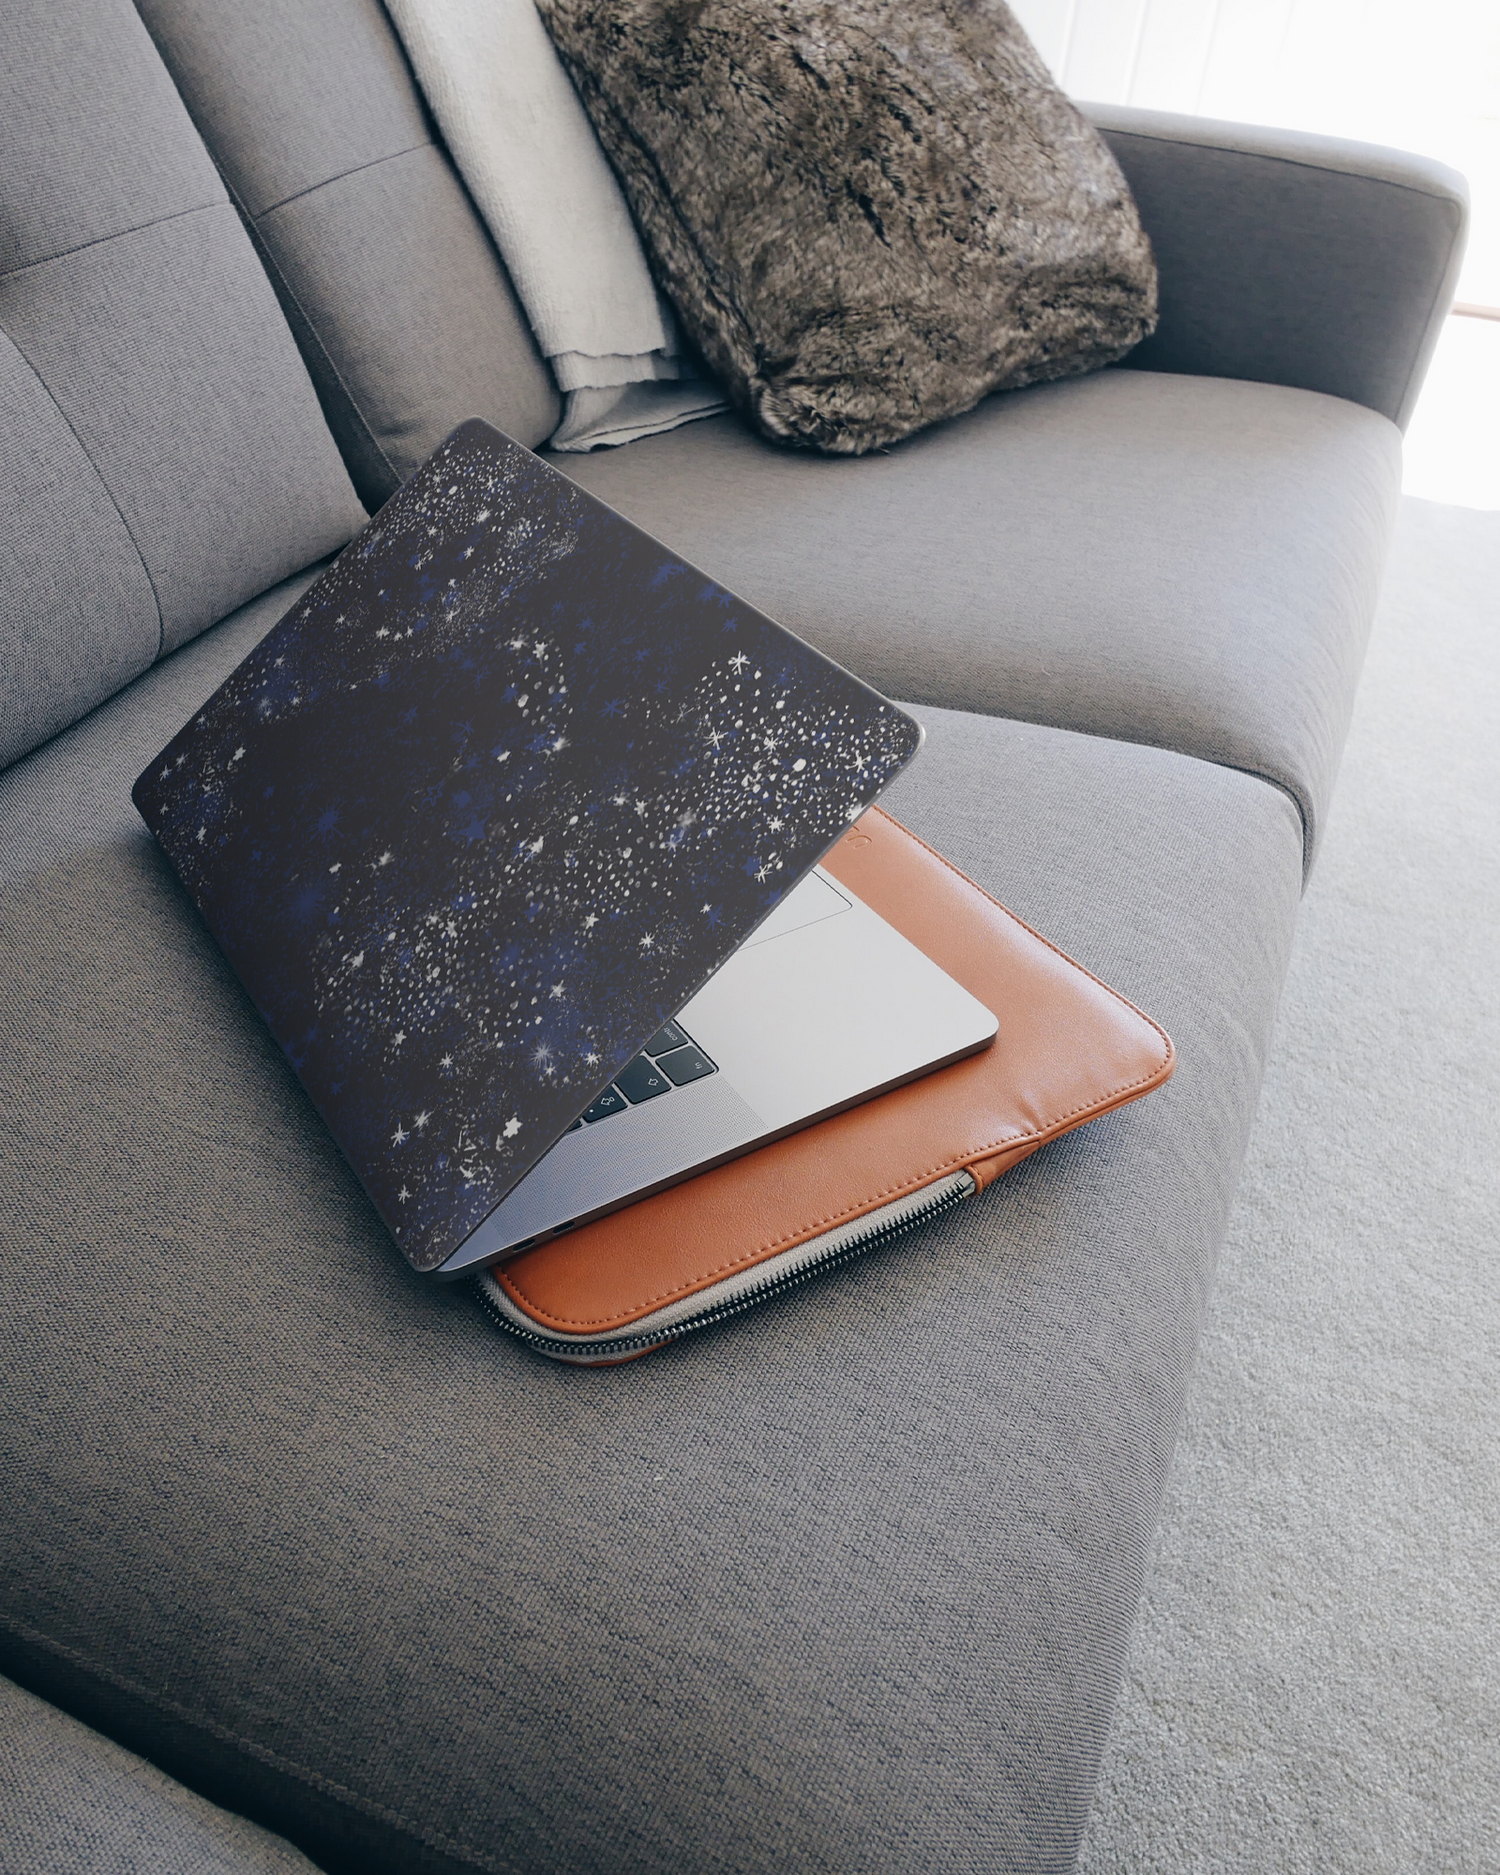 Starry Night Sky Laptop Skin for 15 inch Apple MacBooks on a couch